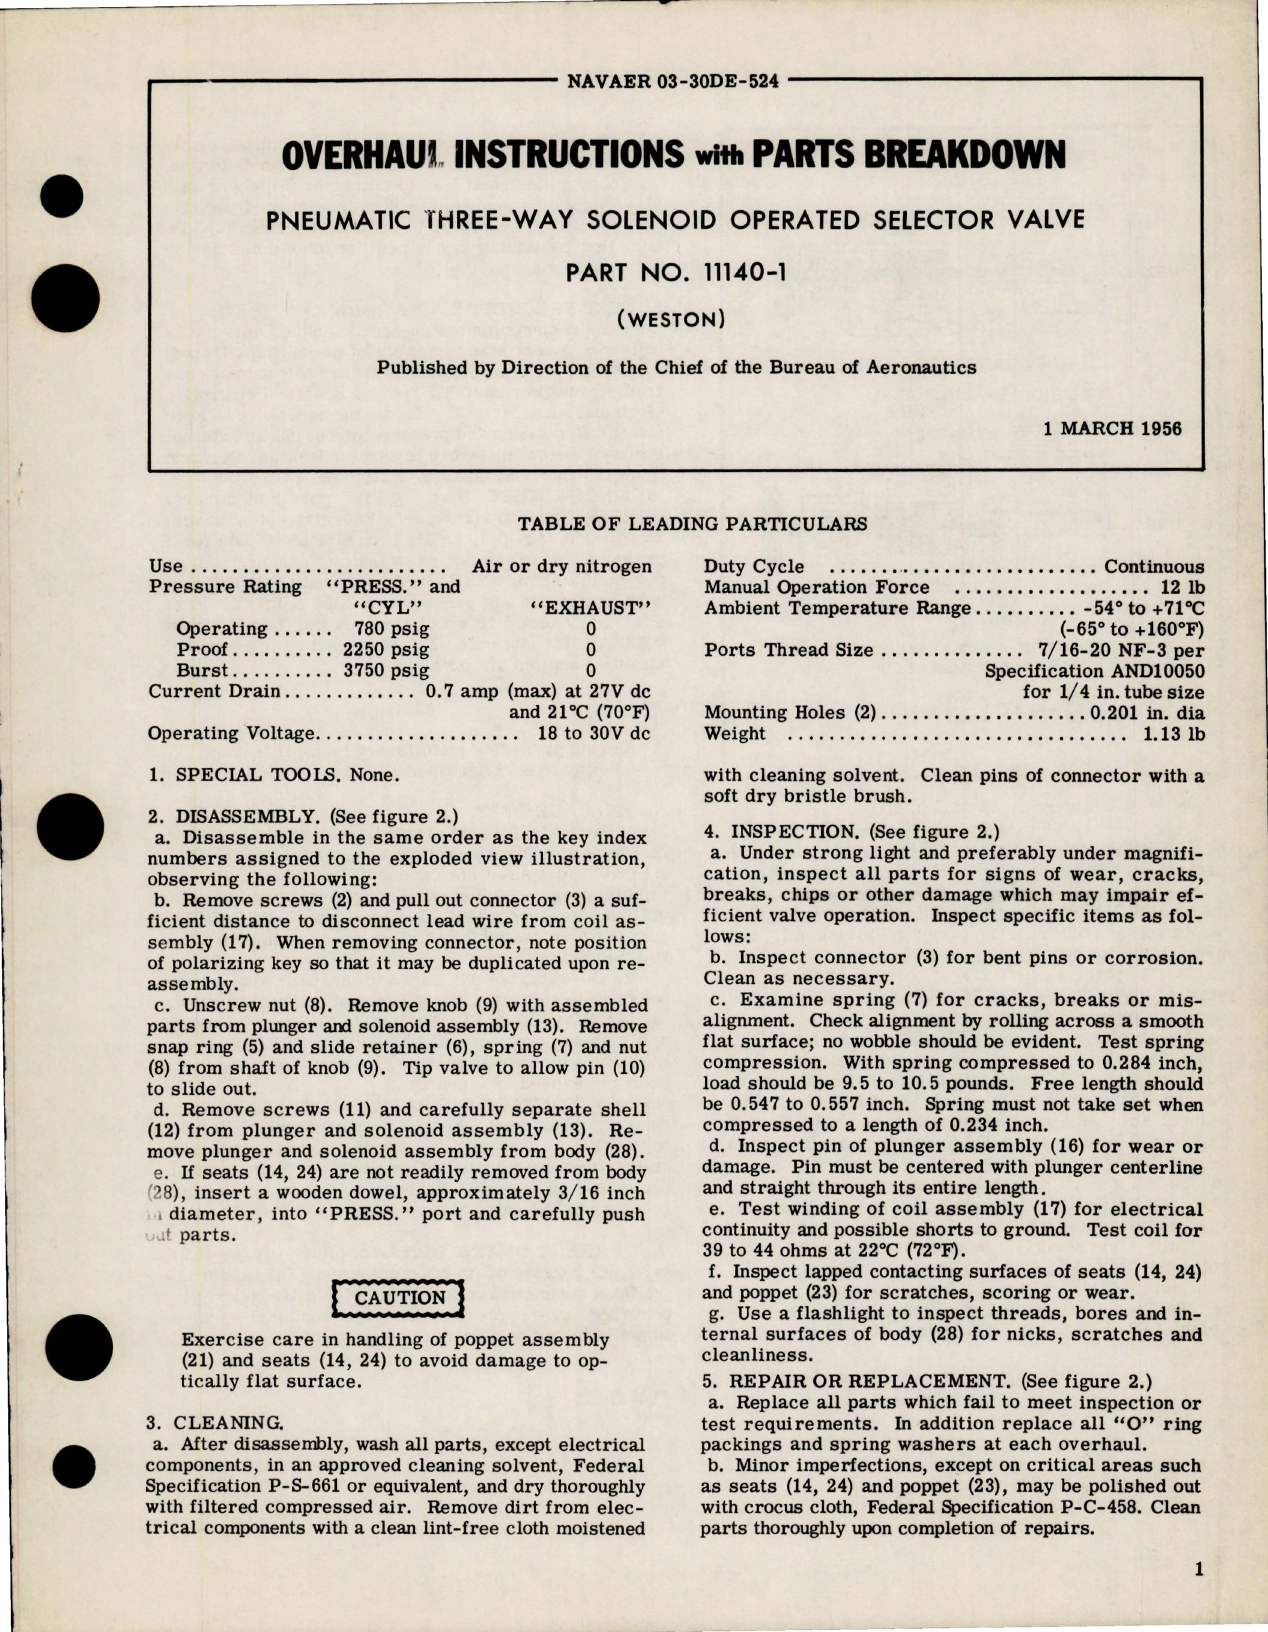 Sample page 1 from AirCorps Library document: Overhaul Instructions with Parts Breakdown for Pneumatic Three Way Solenoid Operated Selector Valve - Part 11140-1